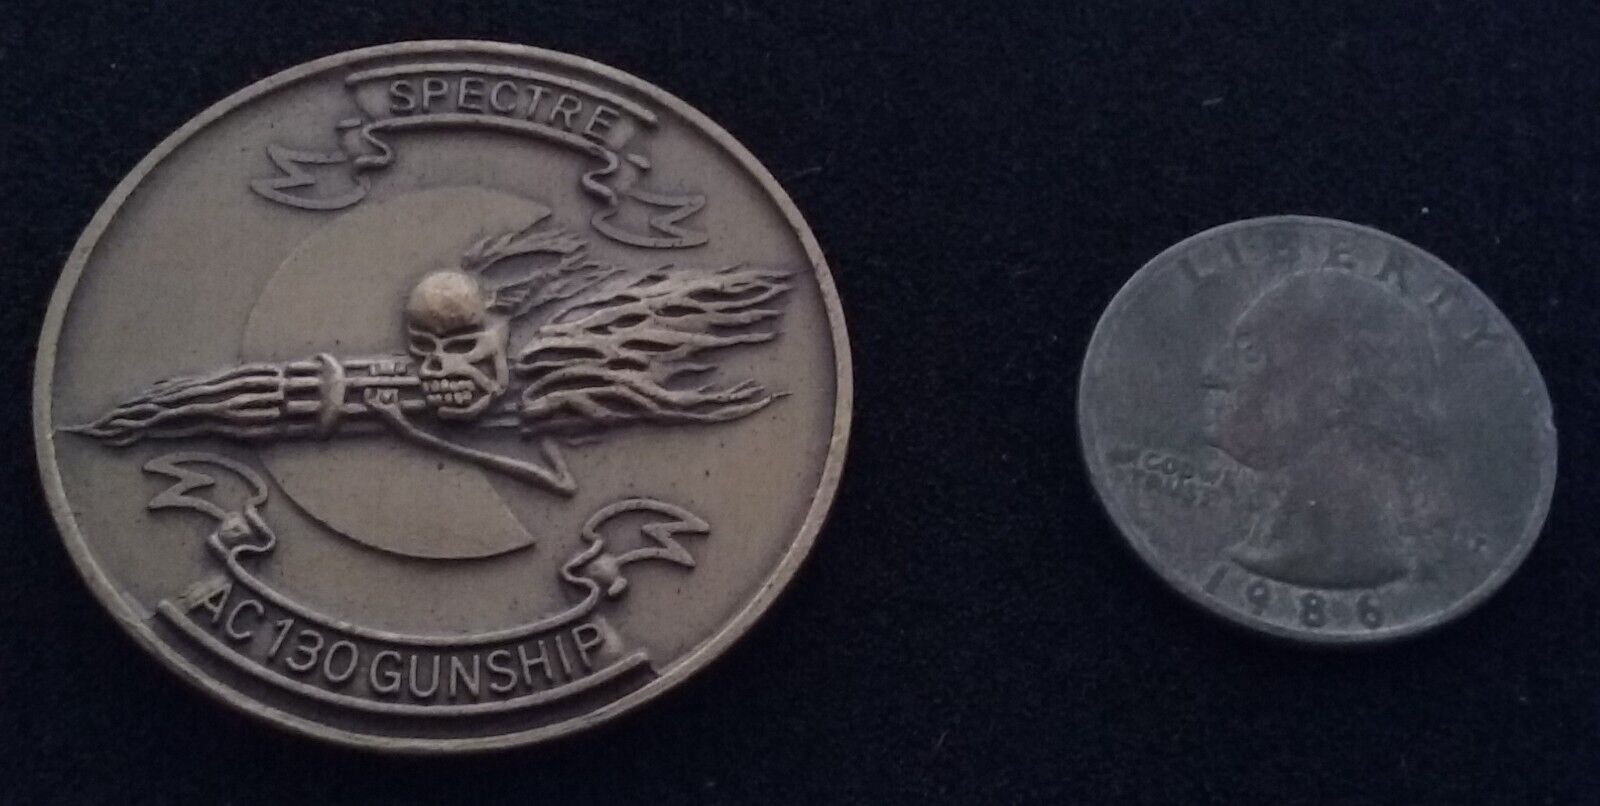 VINTAGE Ghost Rider US Spectre AC-130 Gunship Special Operations Challenge Coin